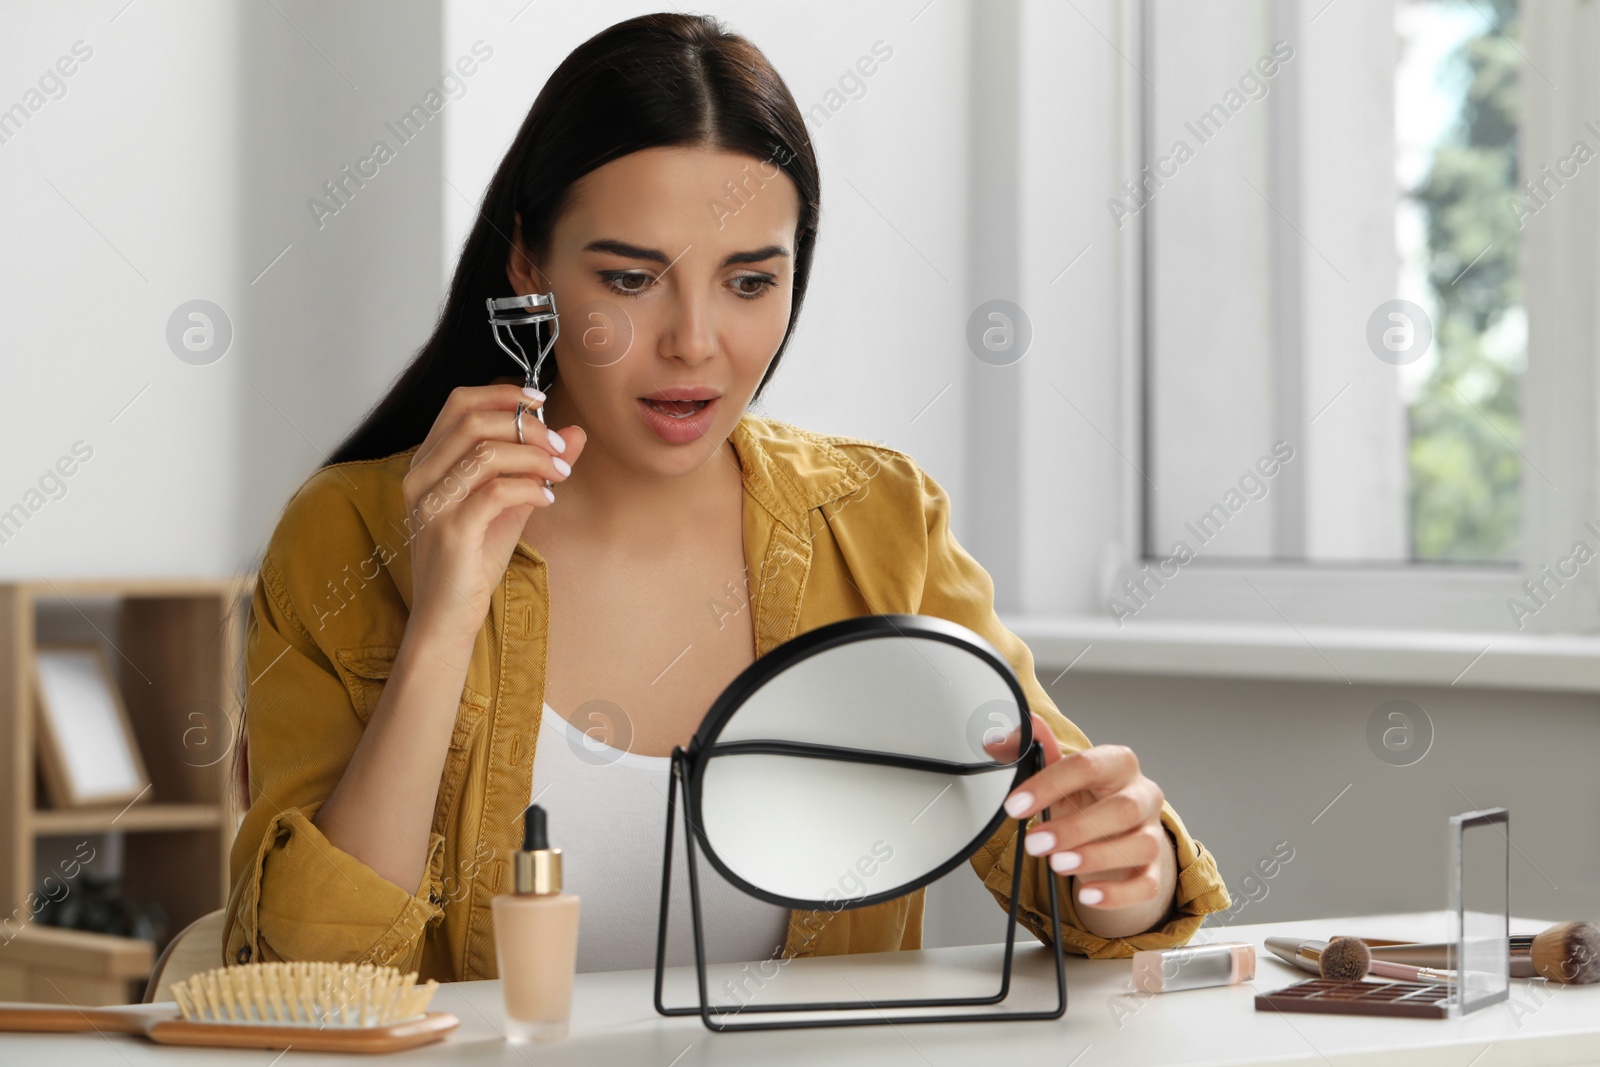 Photo of Emotional young woman using eyelash curler while doing makeup at table indoors